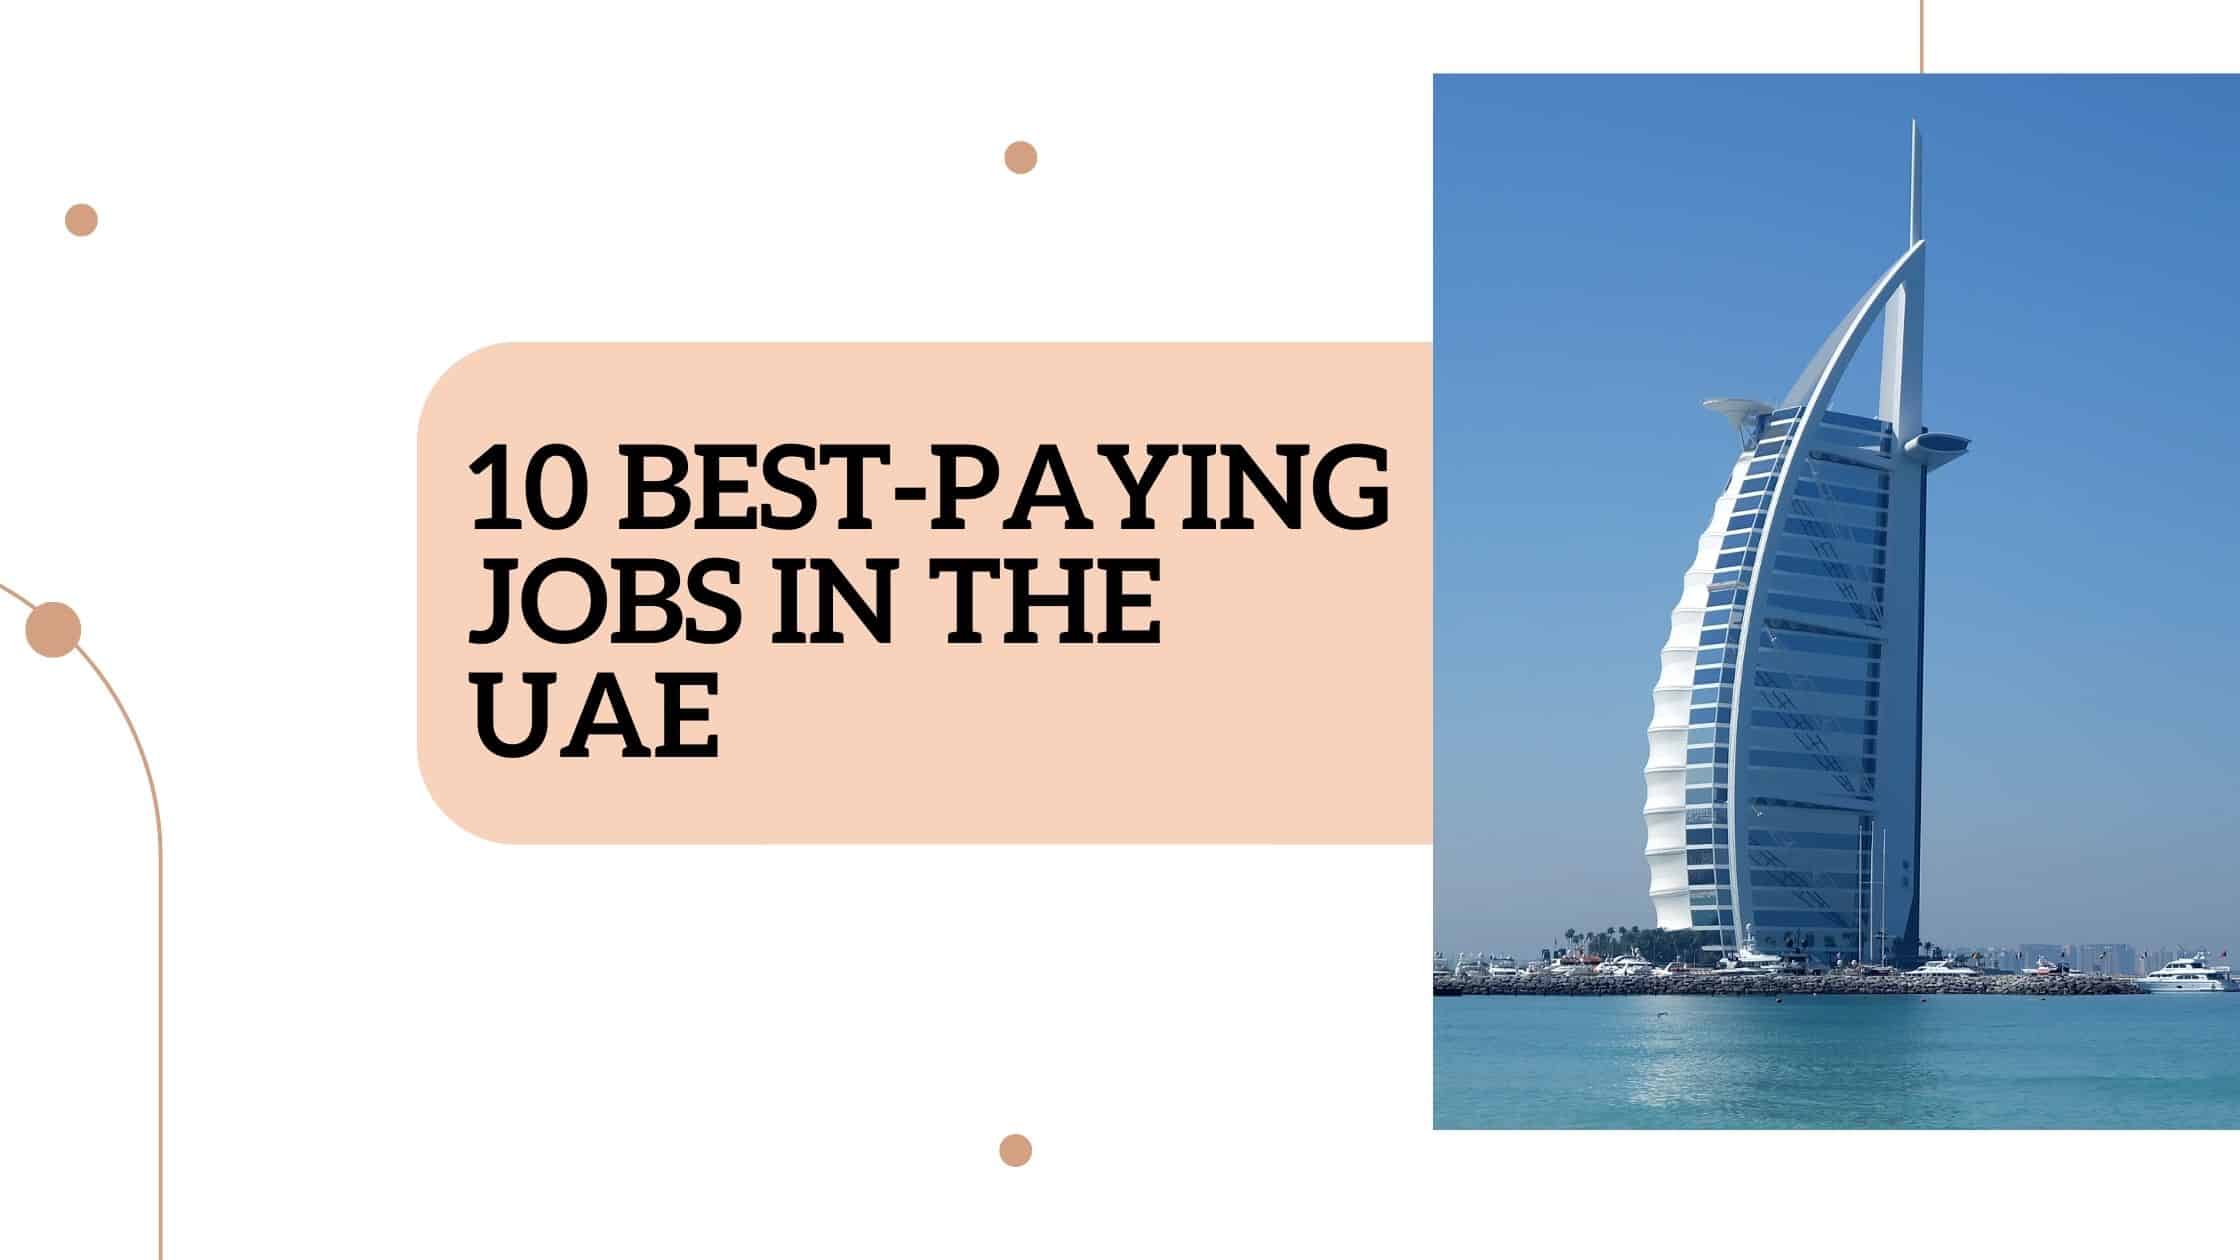 10 best-paying jobs in the UAE